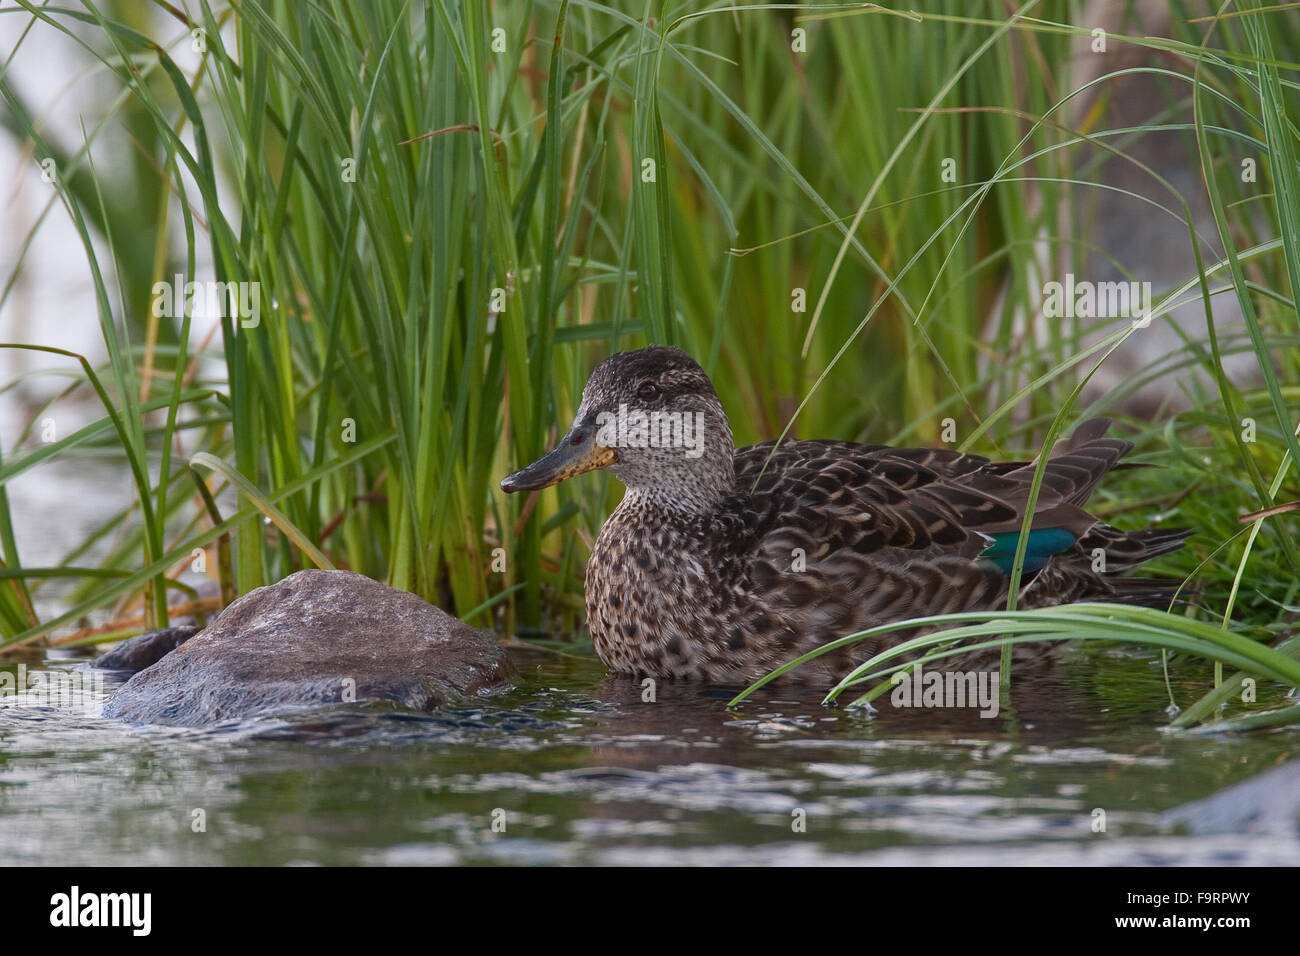 Teal, green-winged teal, female, Krickente, Weibchen, Krick-Ente, Anas crecca, Sarcelle d'hiver Stock Photo